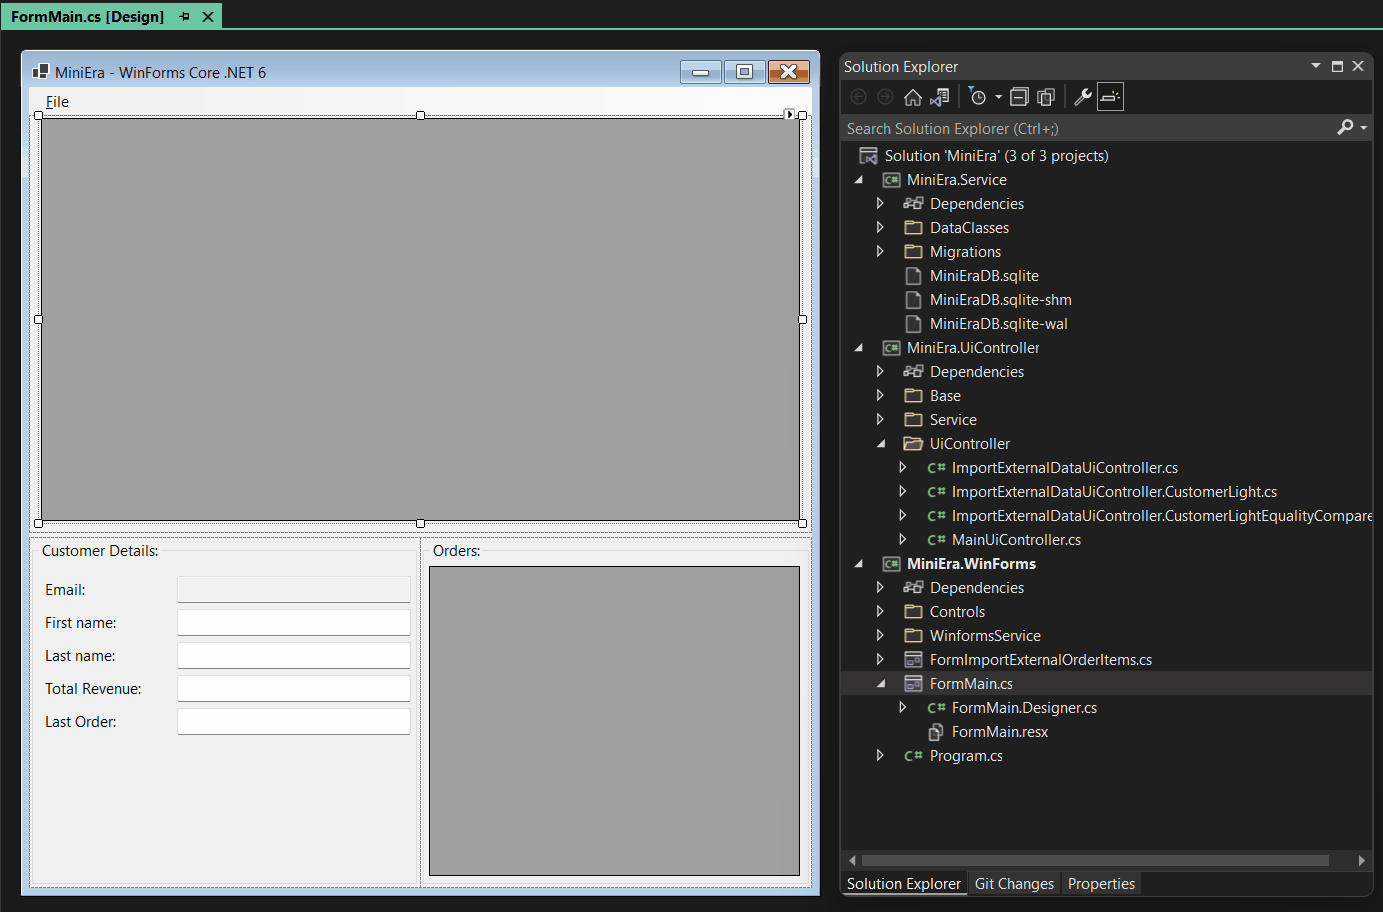 An animated gif showing how to use the Design Binding Picker to access the new Add Object Data Source Dialog